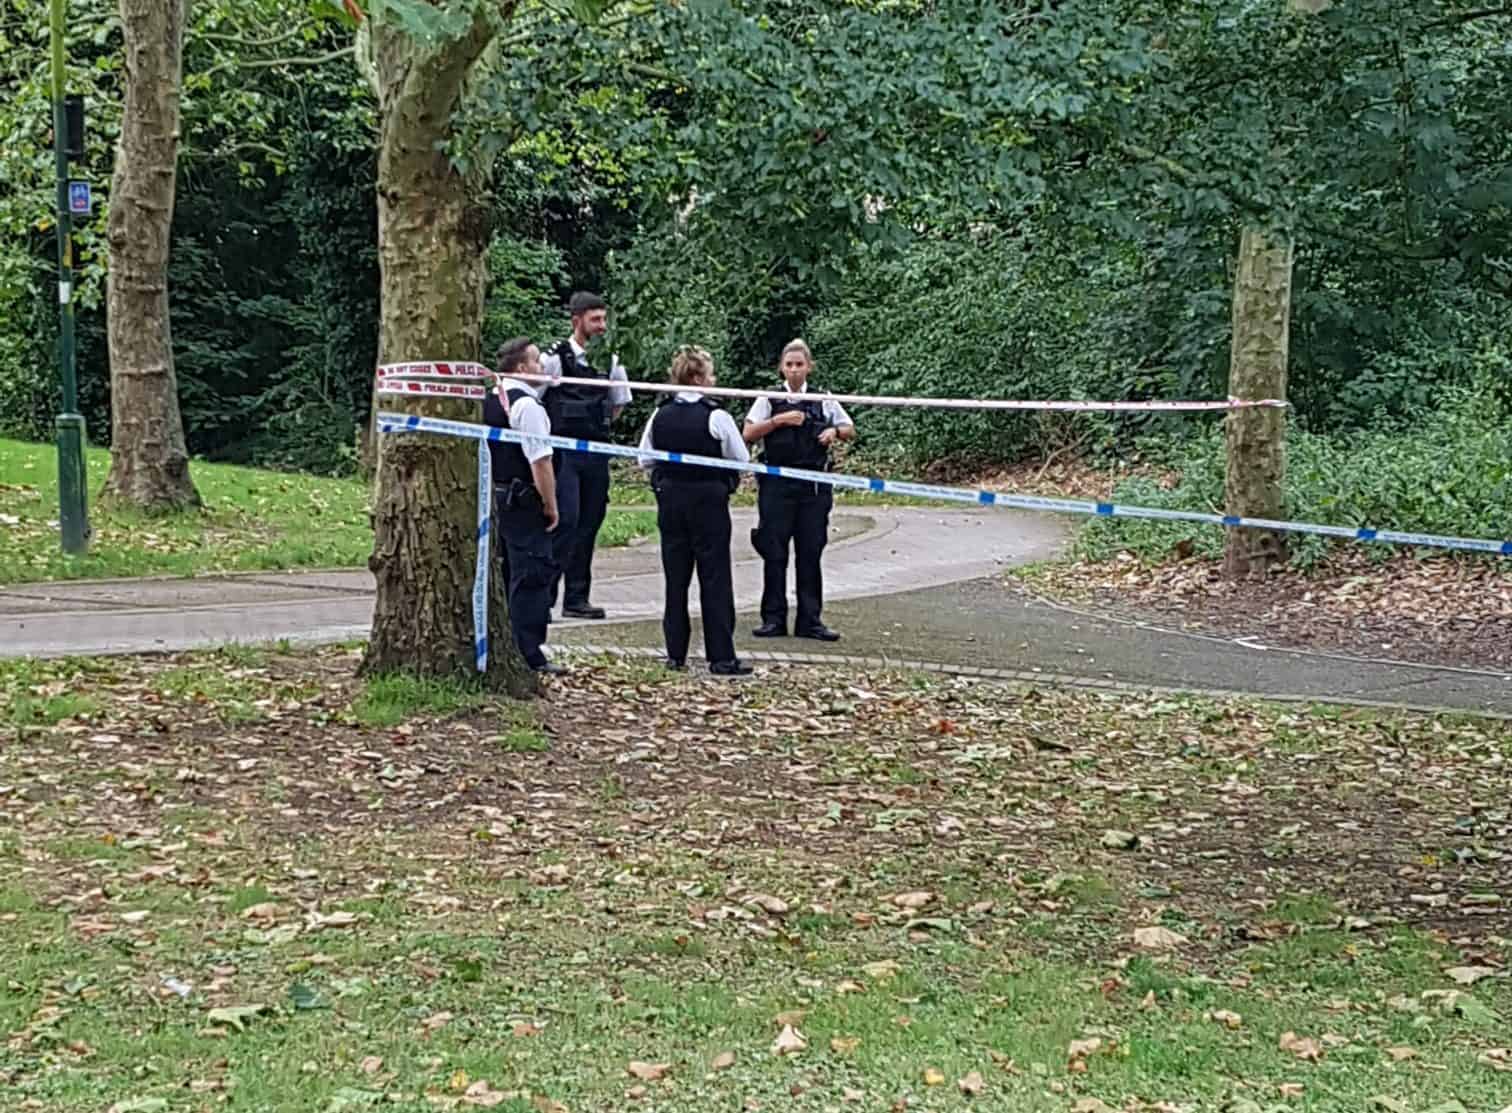 Police have established a cordon at the scene following the discovery of a body this morning